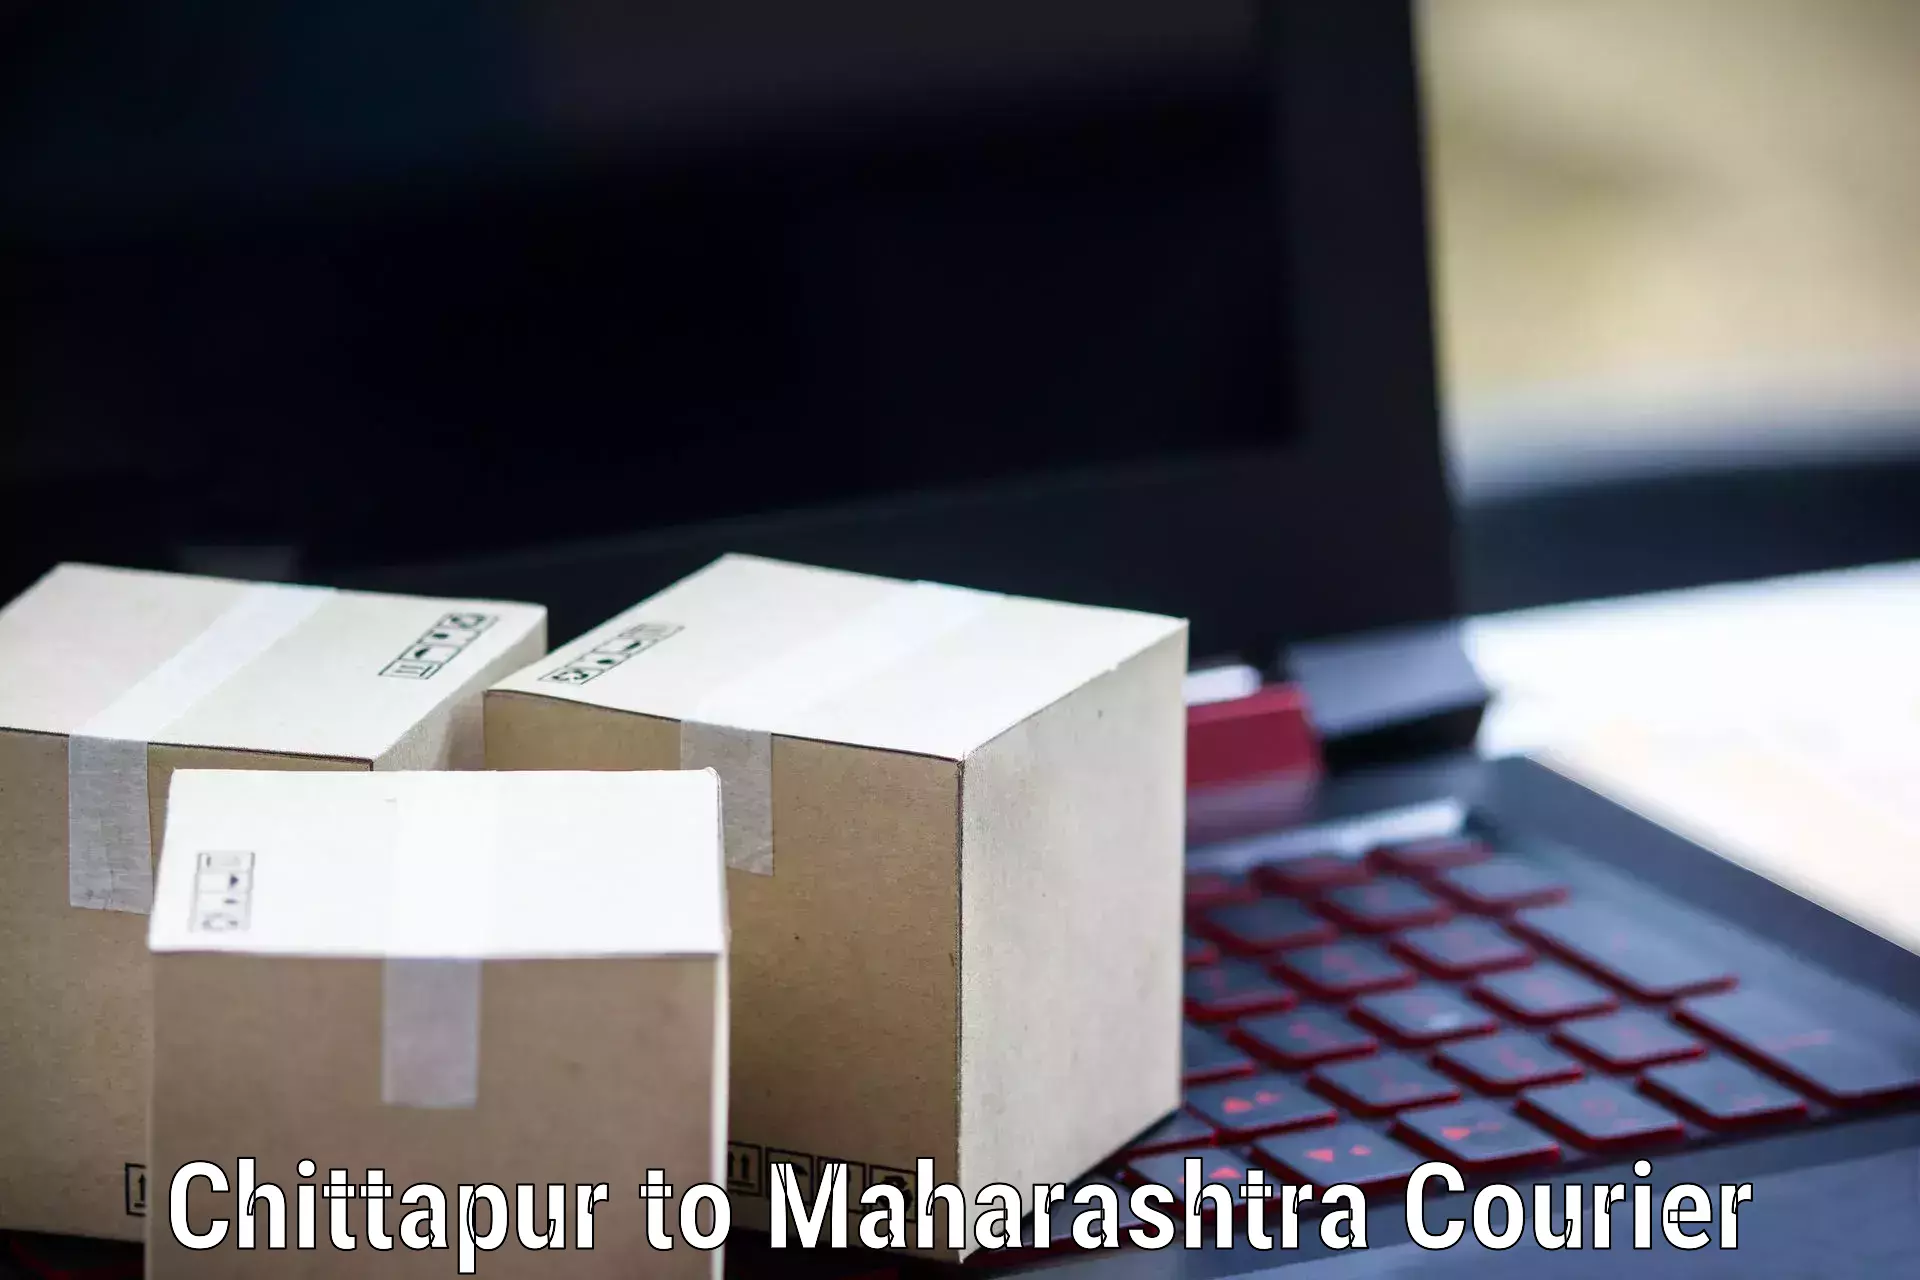 Global shipping solutions Chittapur to Alephata